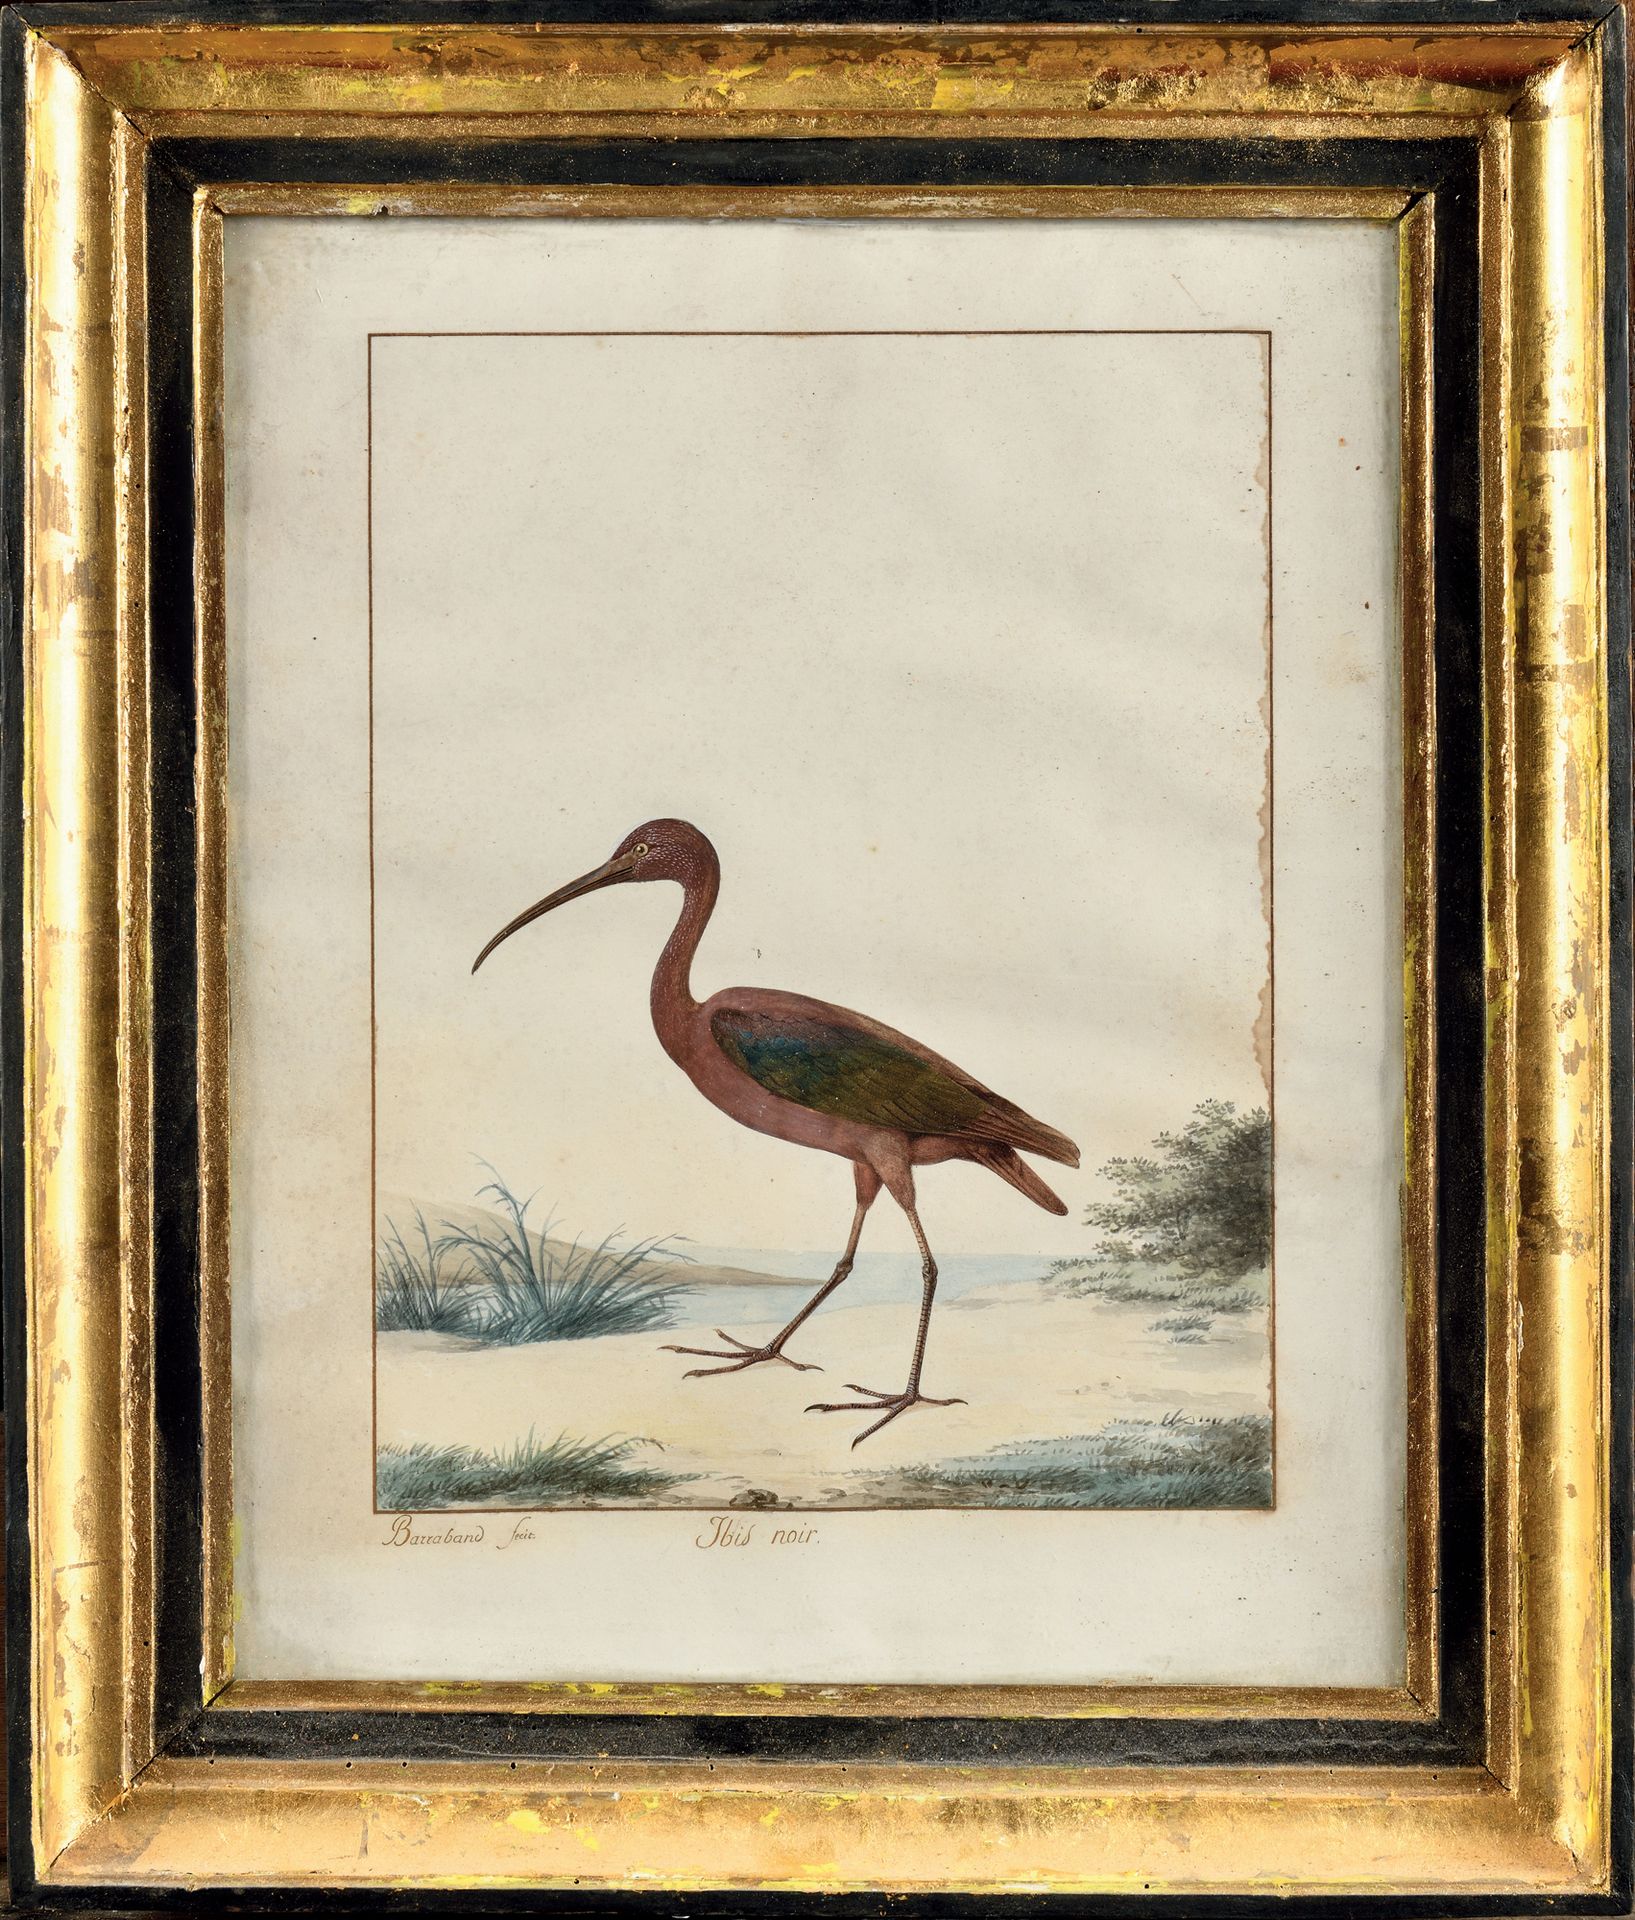 Null JACQUES BARRABAND (1767-1809)

Black Ibis

Watercolor.

Annotated in the ma&hellip;